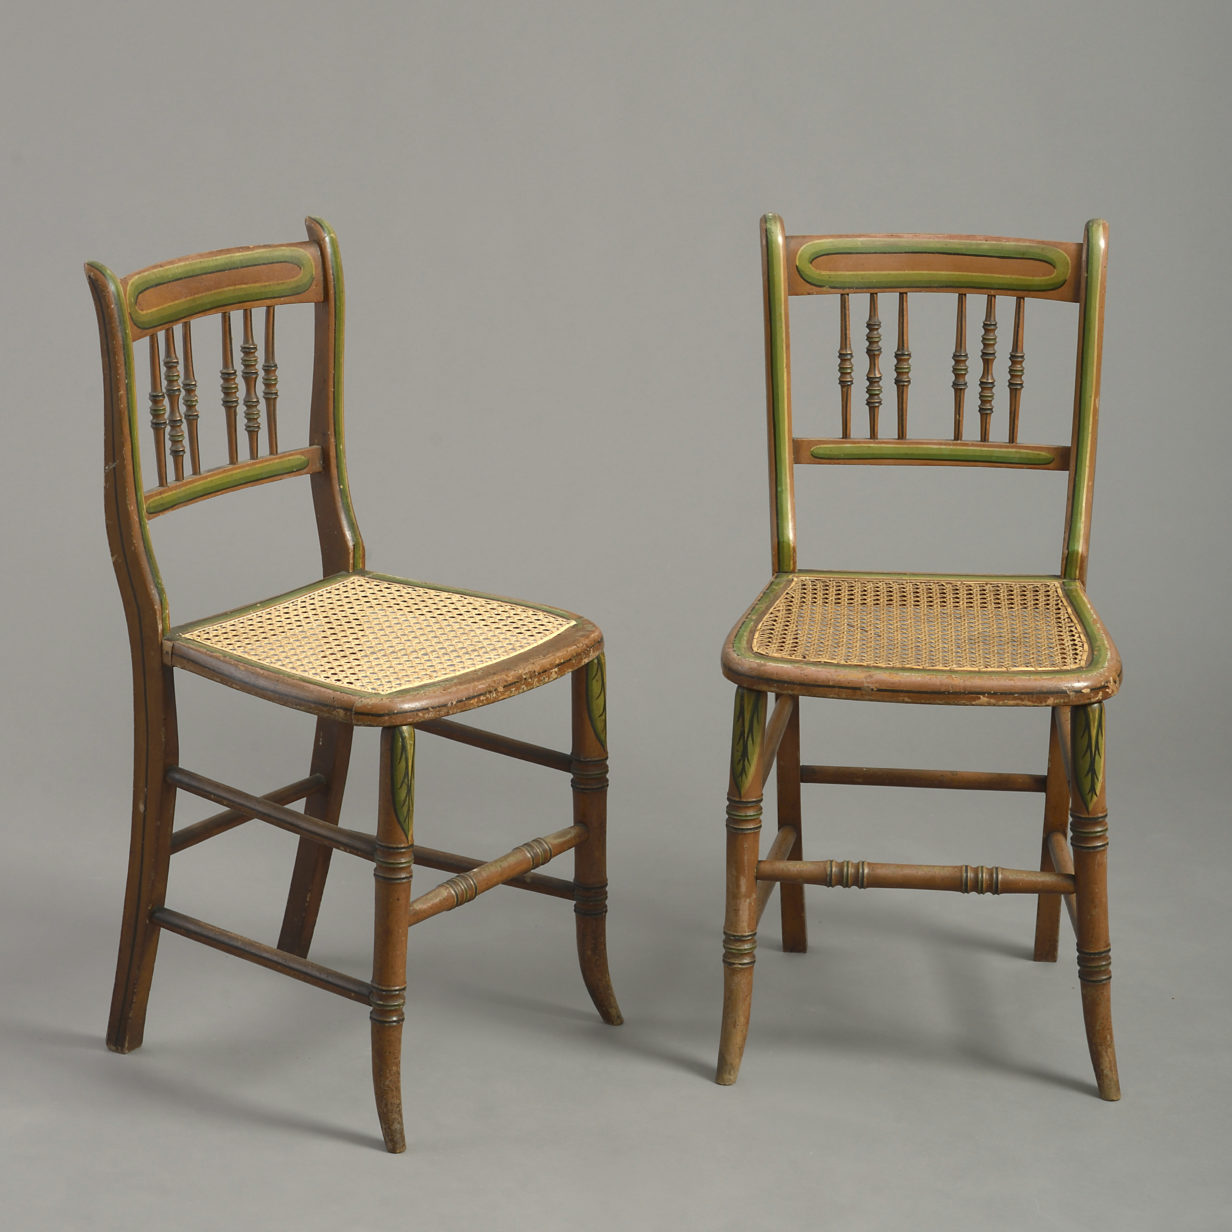 Pair of painted bedroom chairs